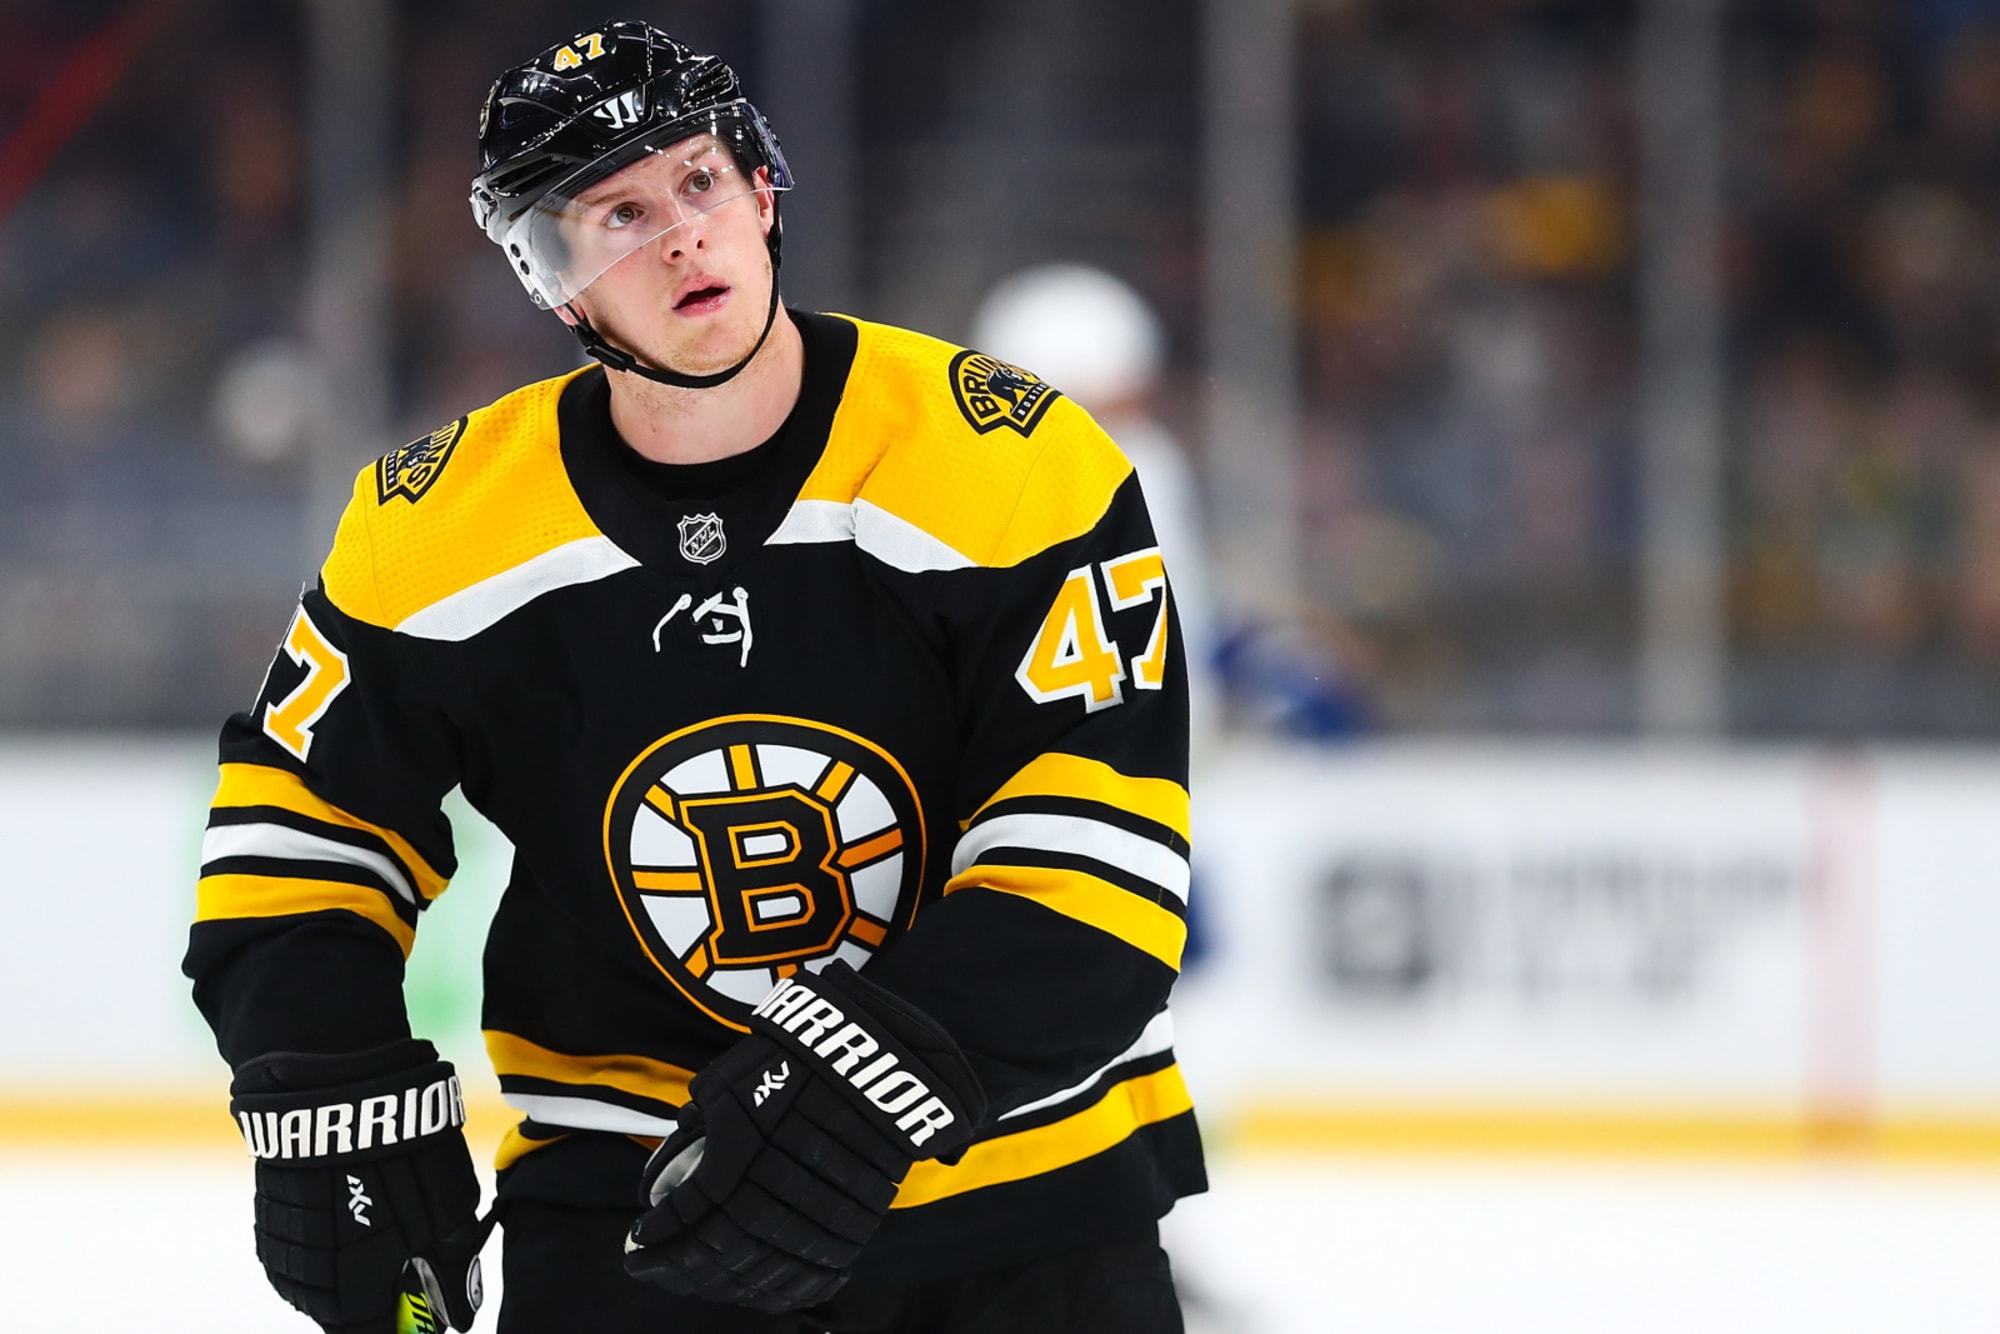 Morning sports update: Here's what Torey Krug had to say about his